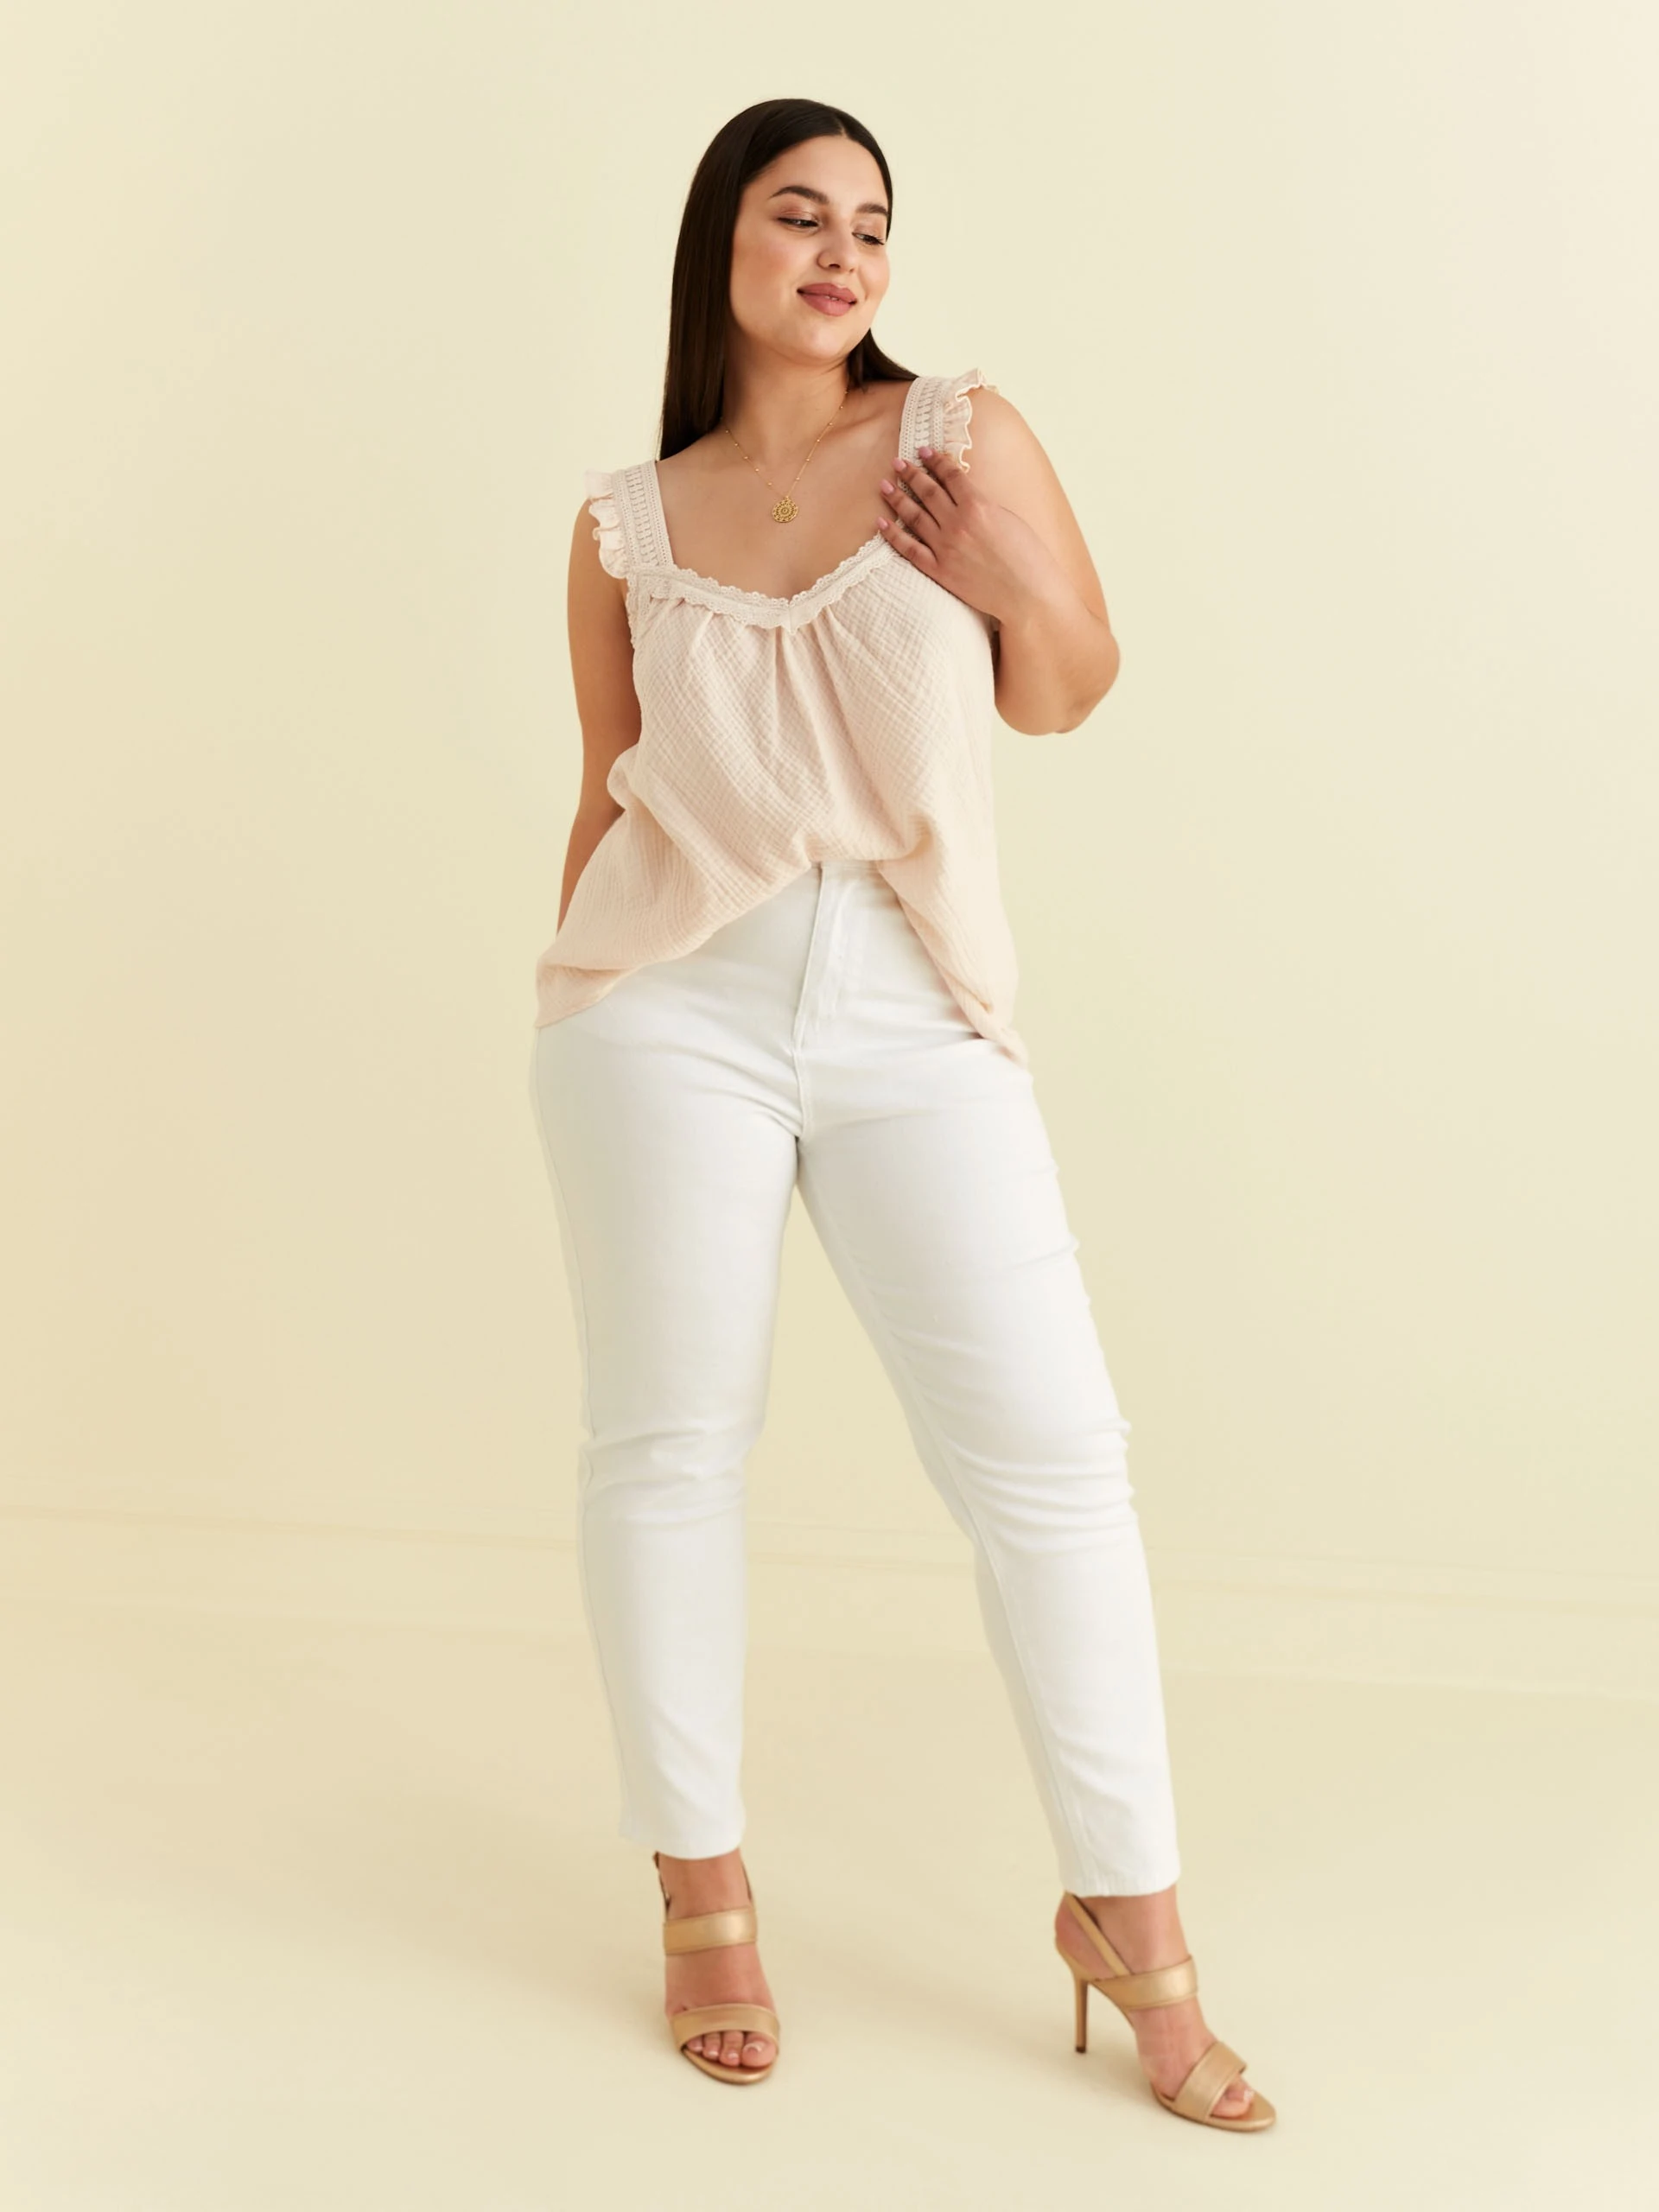 BEIGE TOP WITH LACE DETAILS